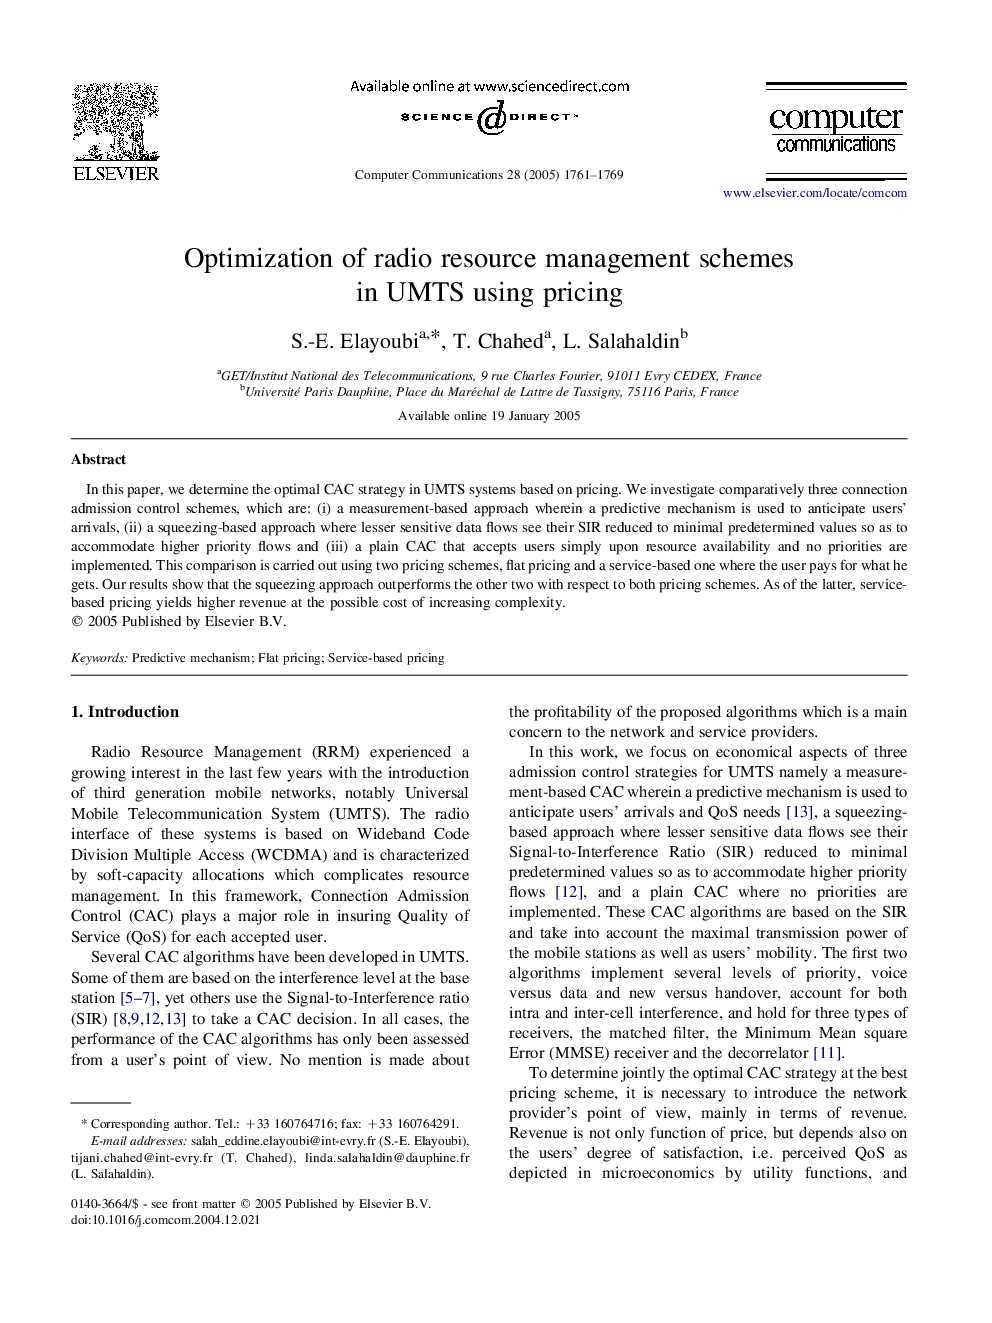 Optimization of radio resource management schemes in UMTS using pricing